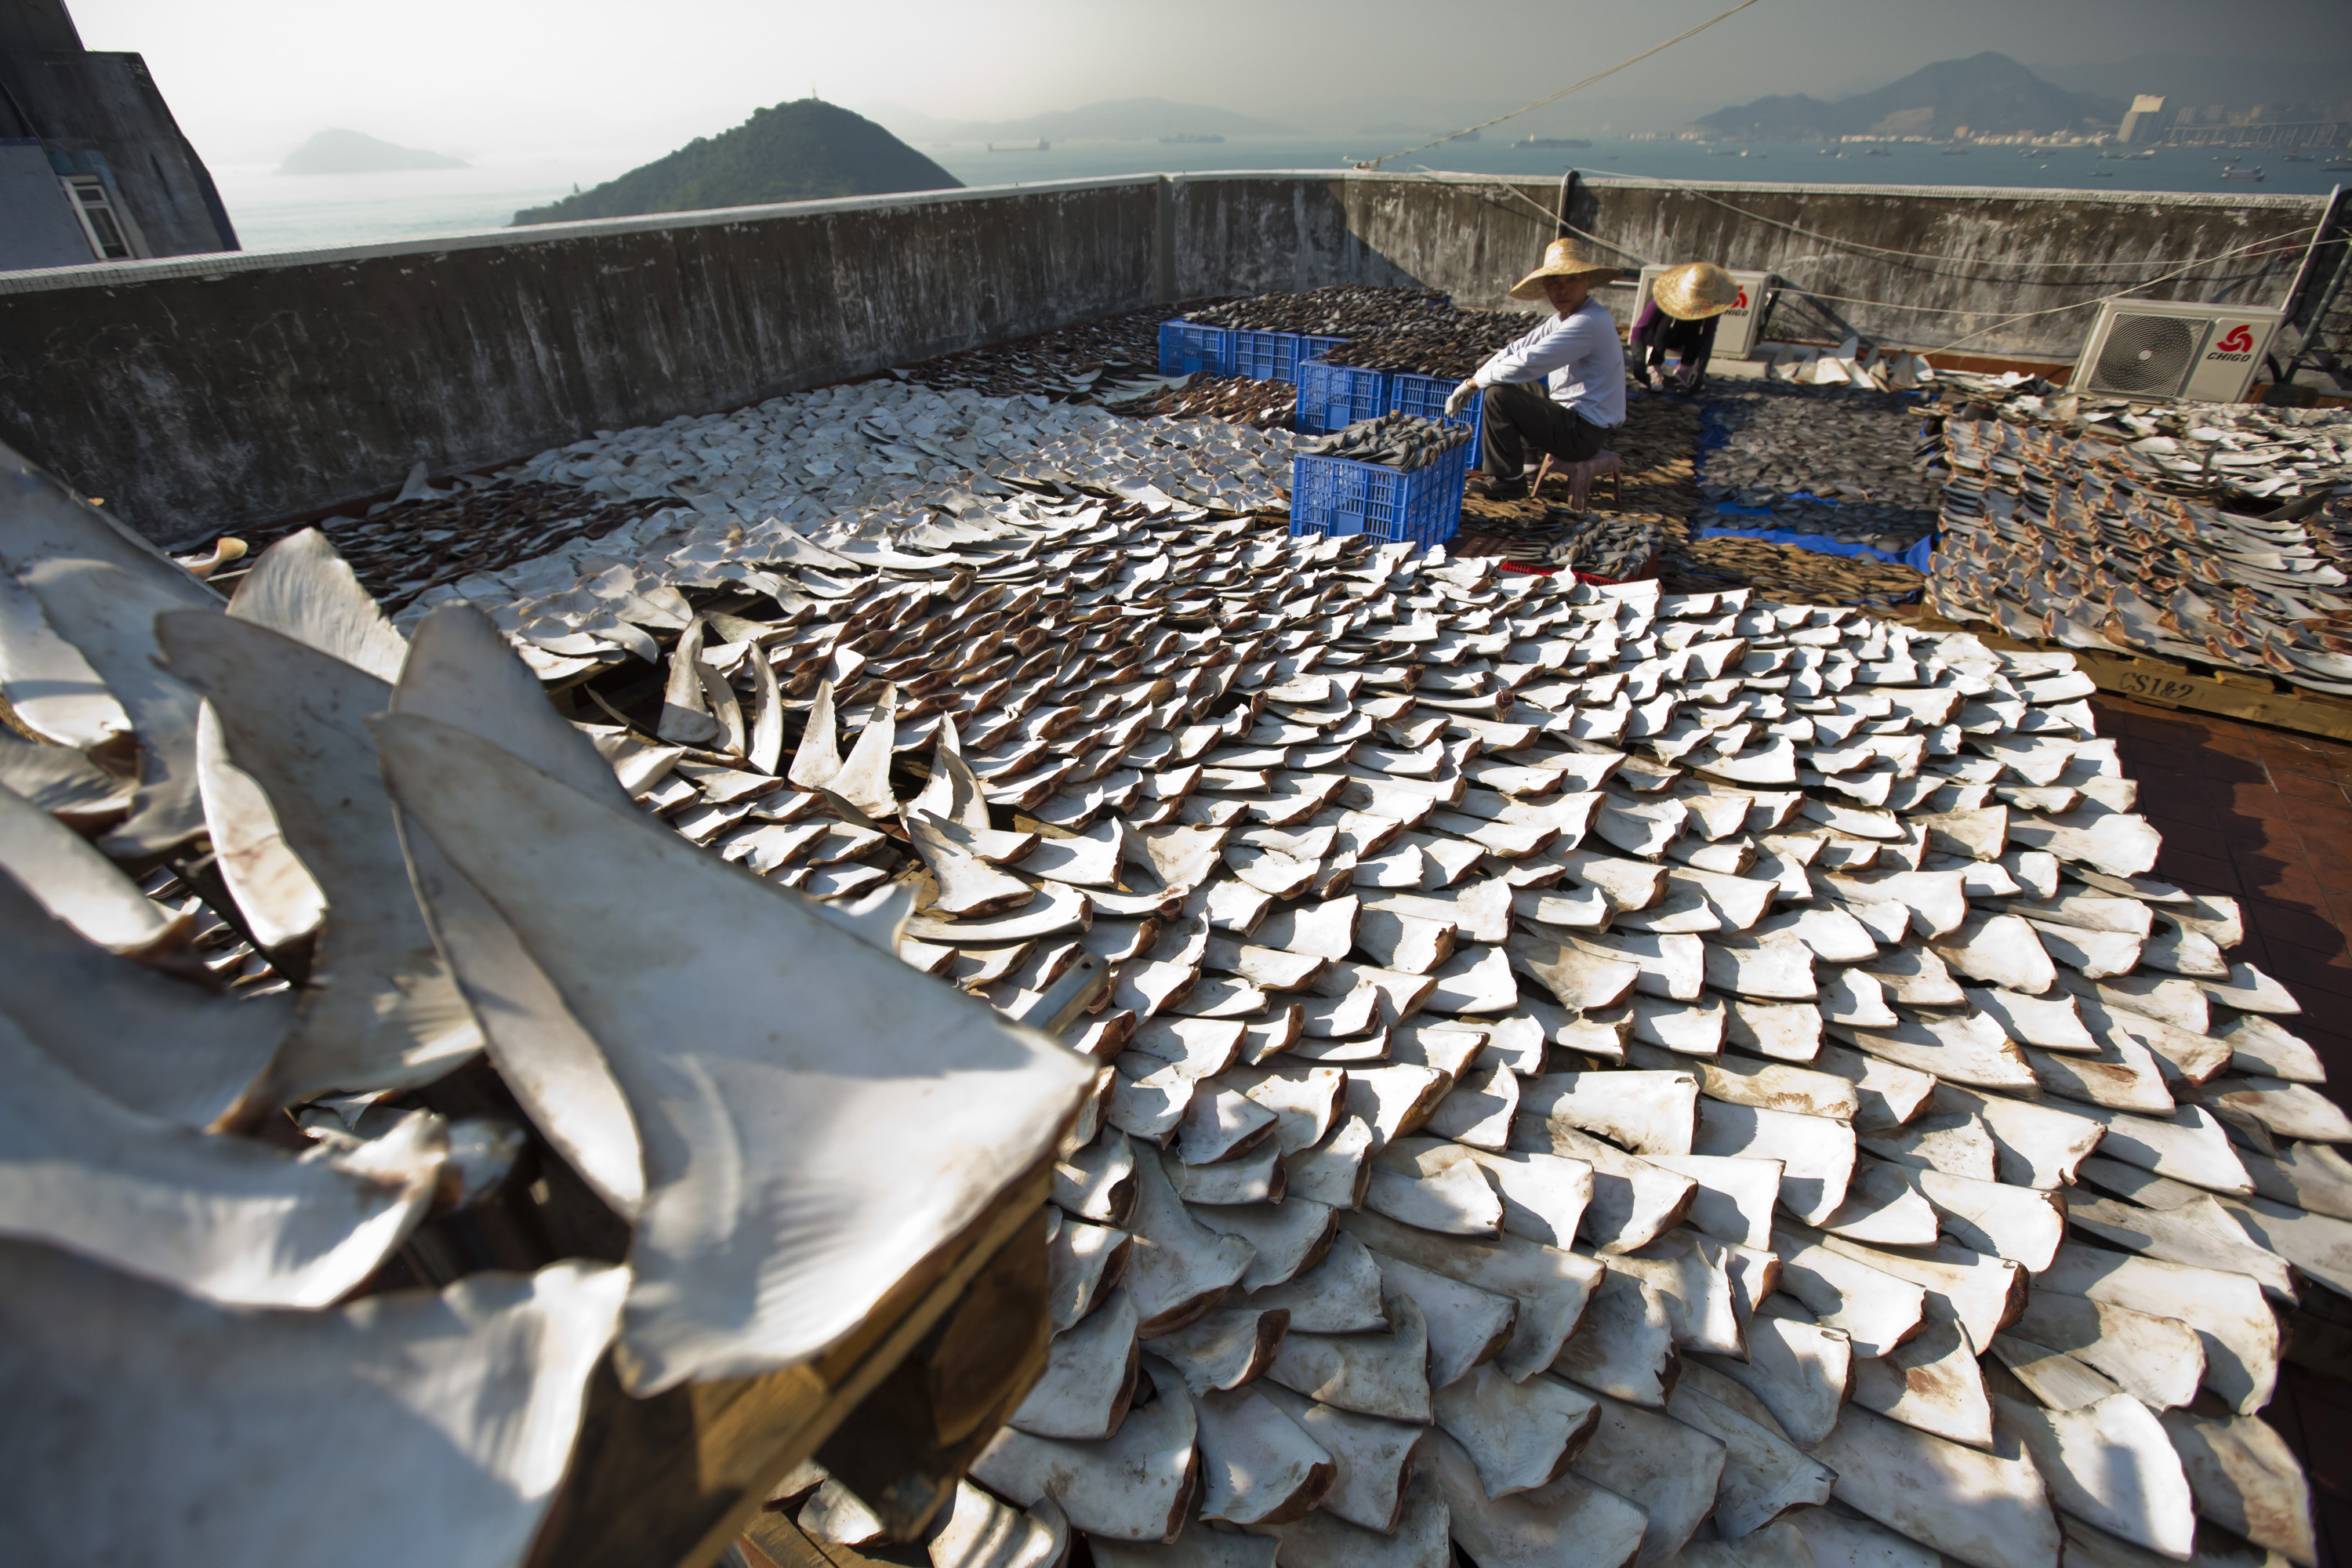 SHARK FINS. Thousands of shark fins are left out to dry on a rooftop in Hong Kong's Kennedy Town district on January 2, 2013. File photo by Paul Hilton/EPA 